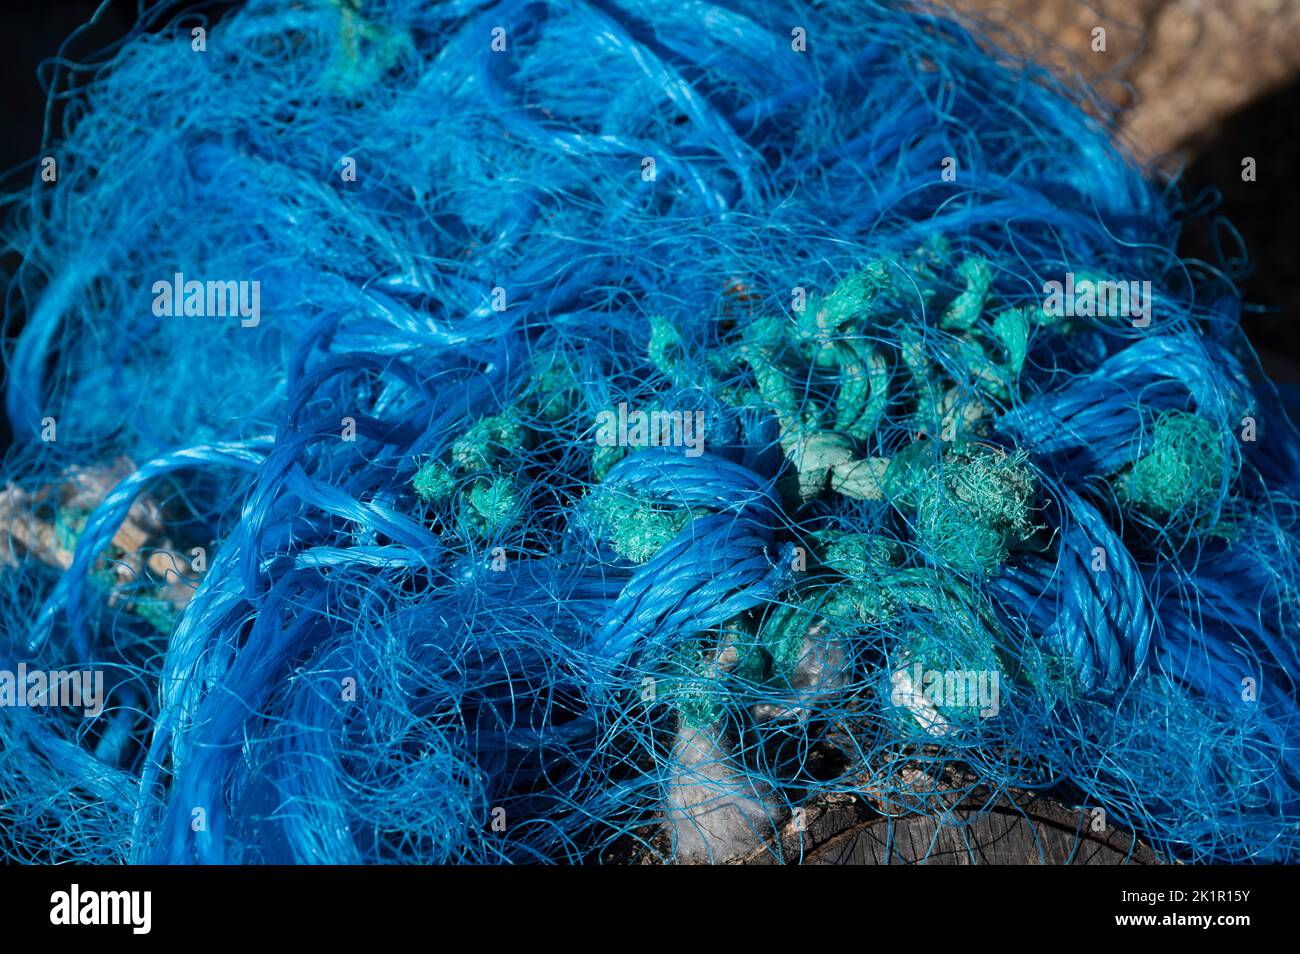 Wales, Pembrokeshire. Dale village. Discarded fishing net. Stock Photo